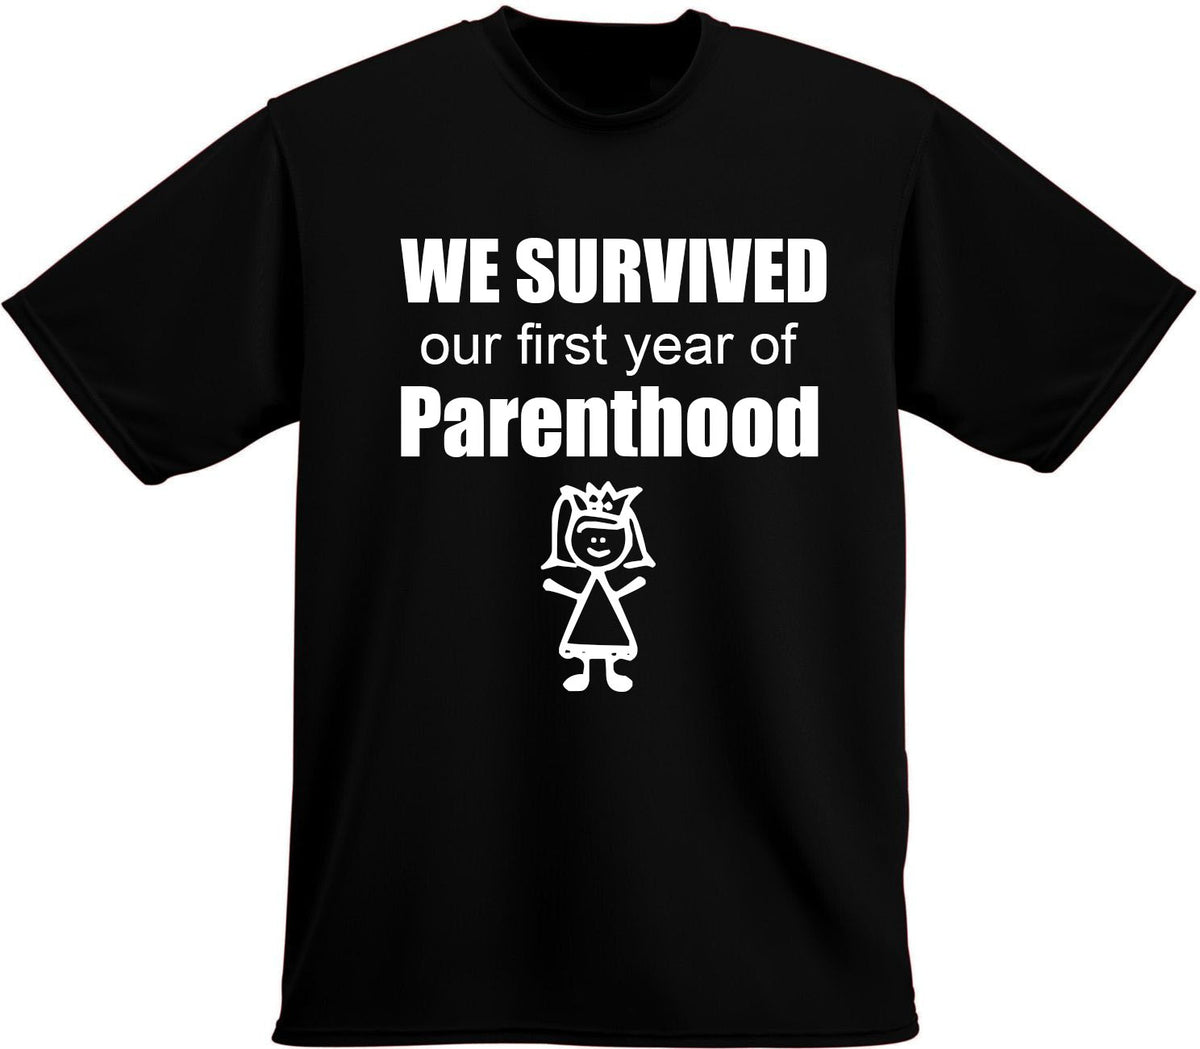 We survived the first year of parenthood t-shirt